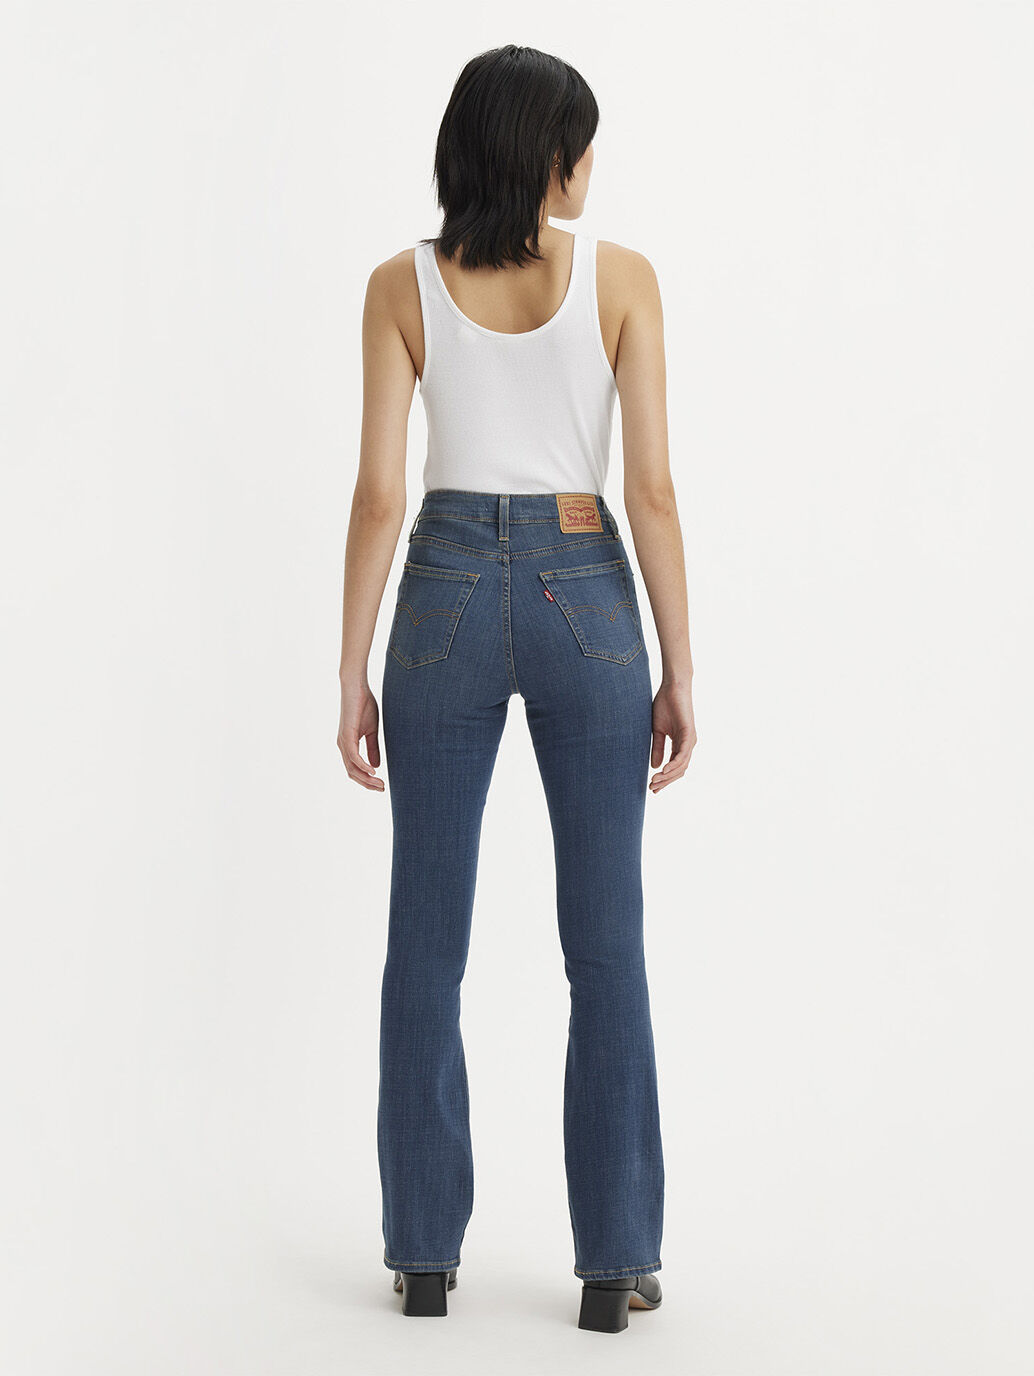 Levi's® Women's 725 High-Rise Bootcut Jeans - Tore It Up